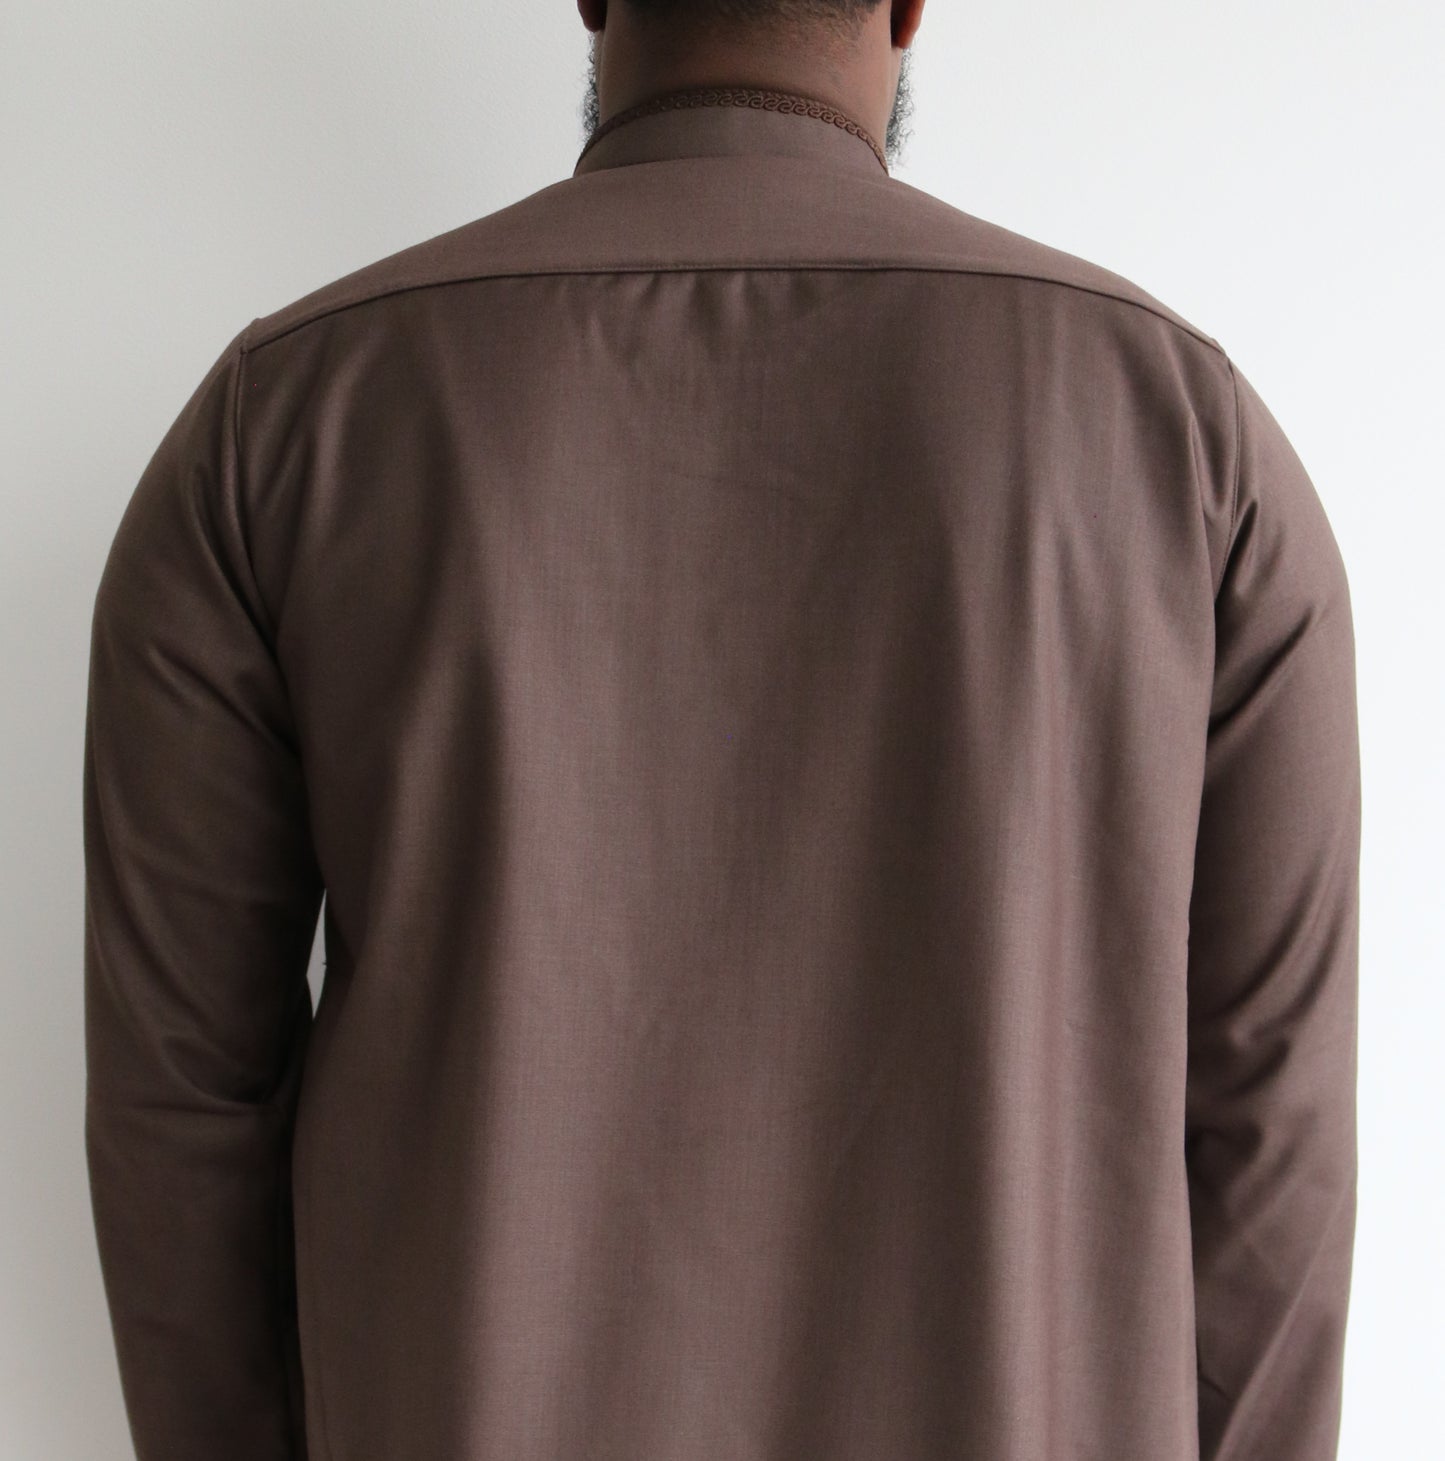 Umber Brown - Non-Hooded